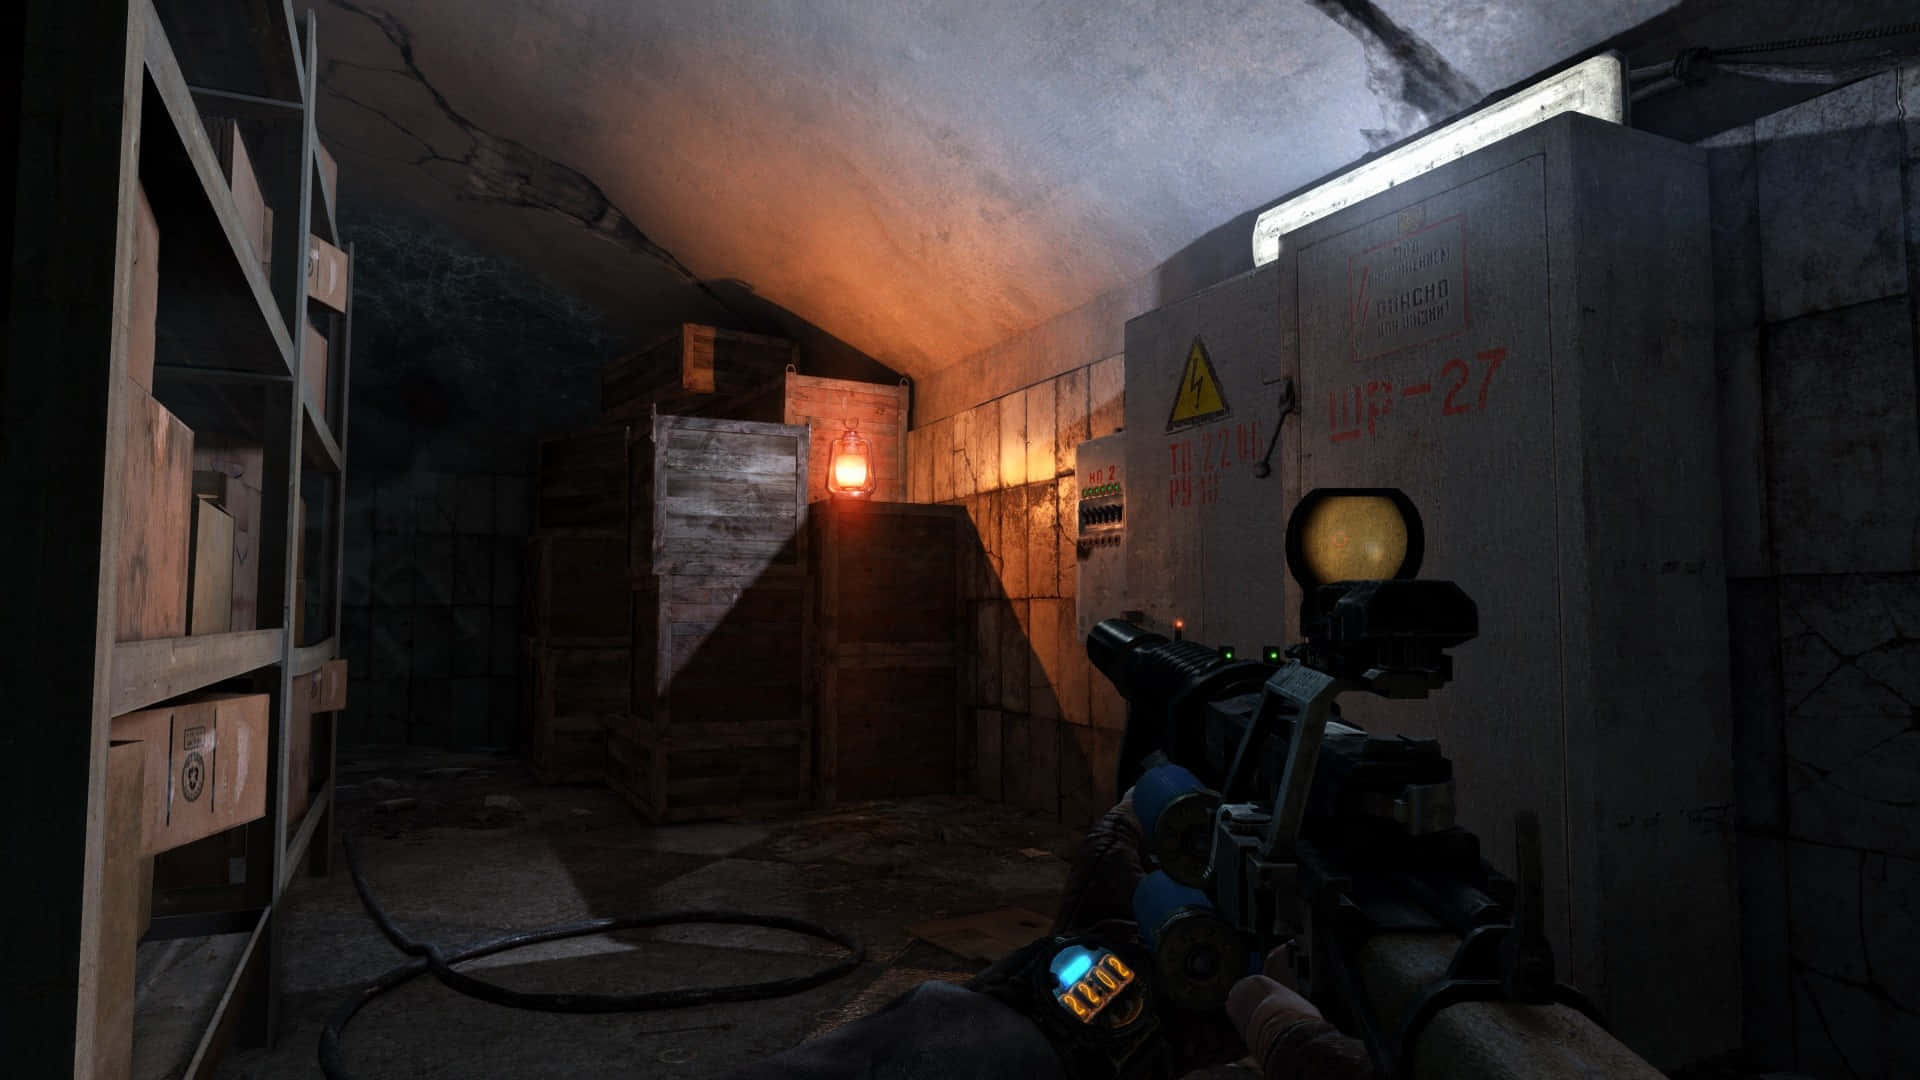 A Screenshot Of A Room With A Gun In It